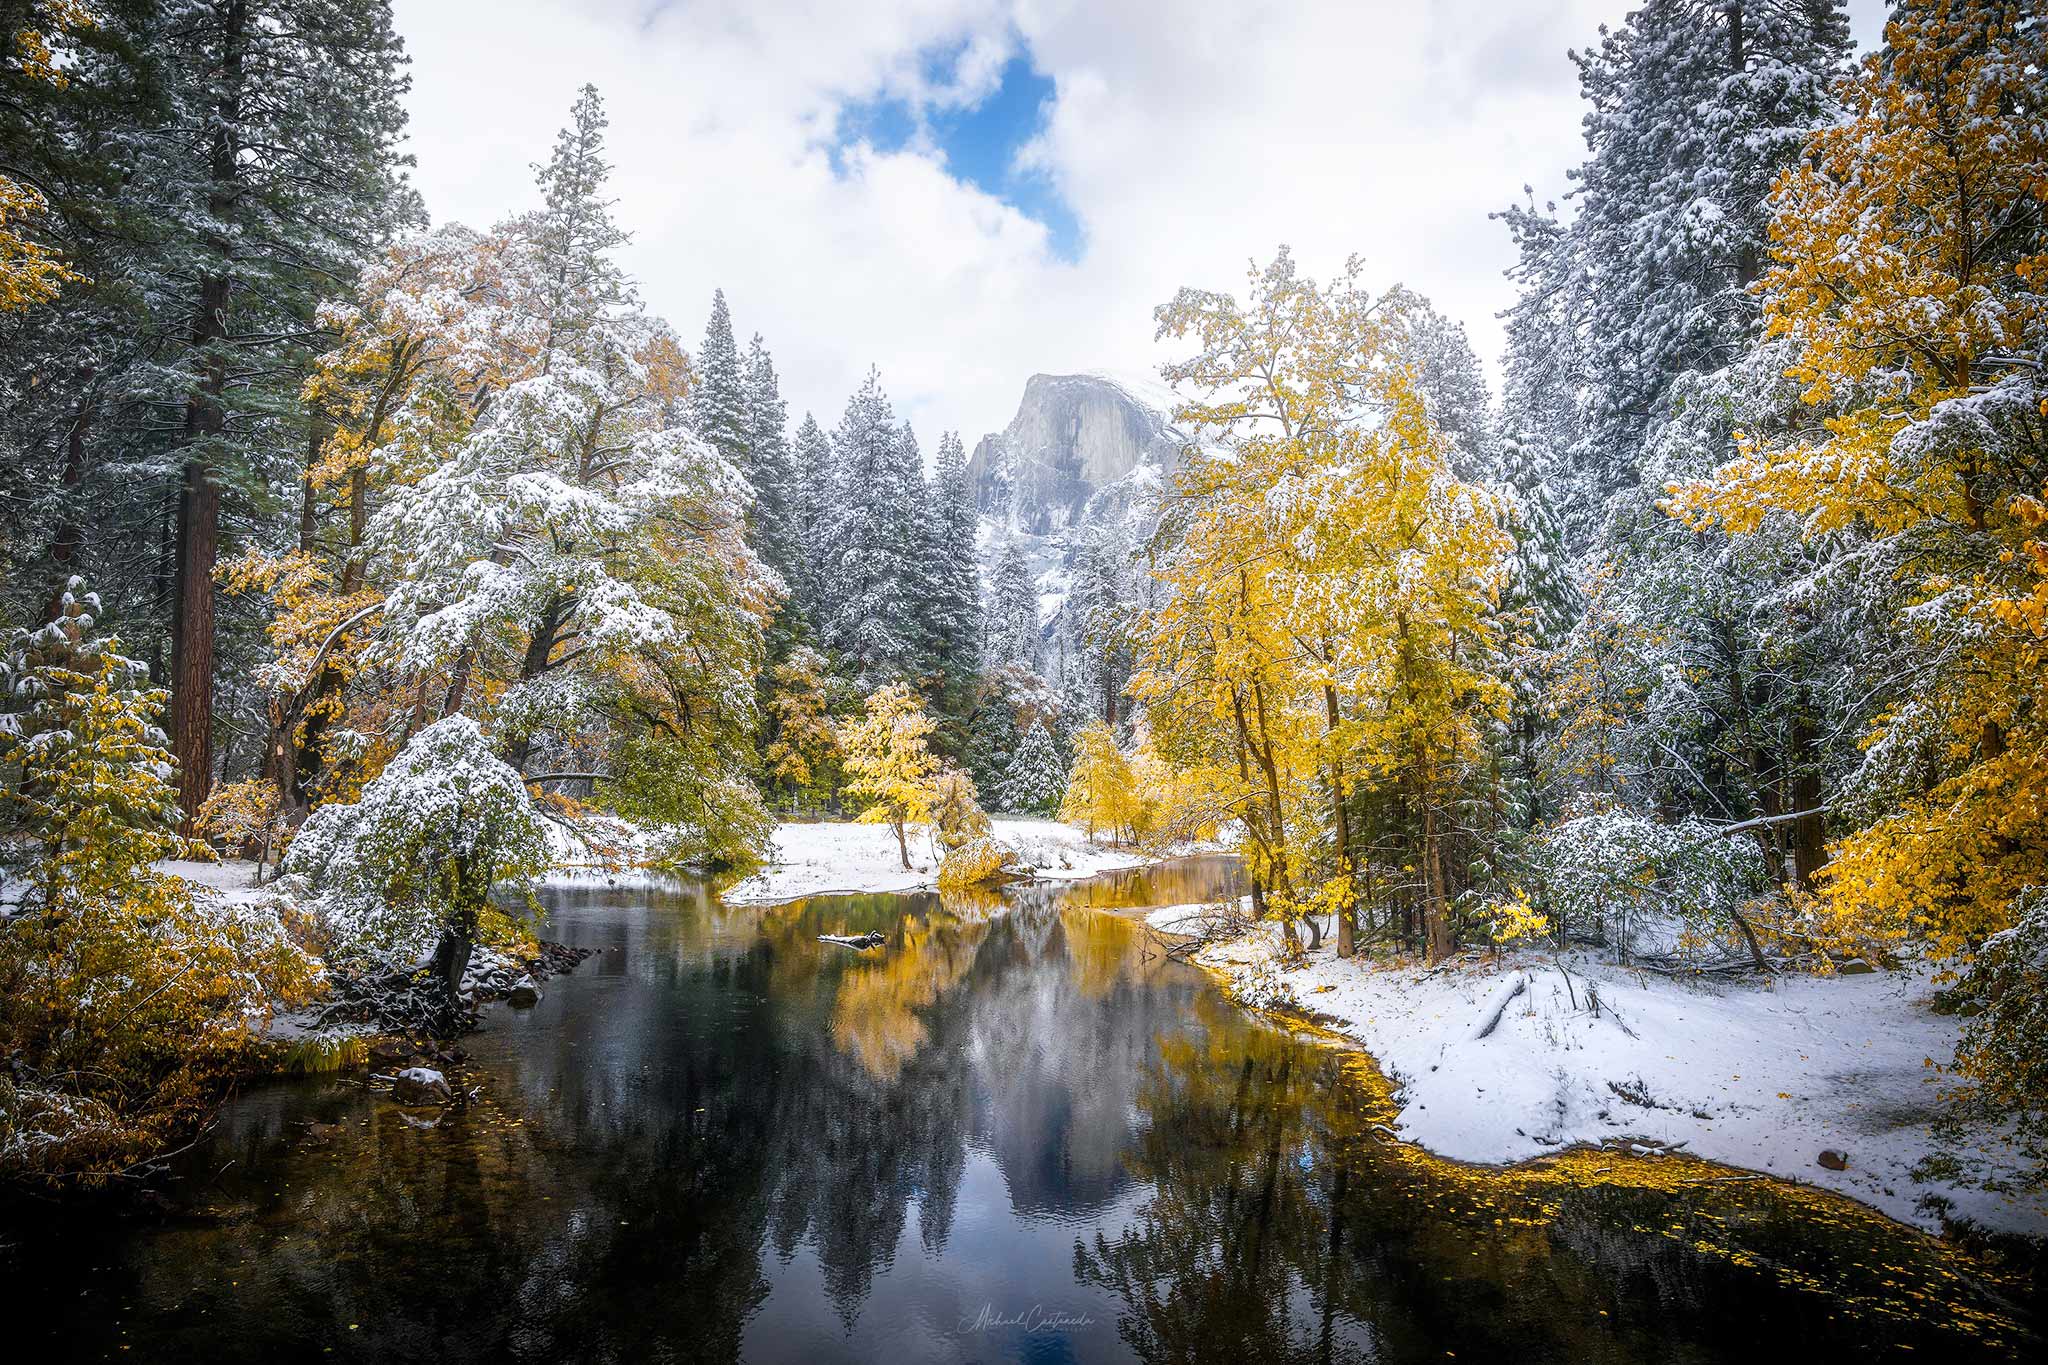 In What Month Does Yosemite Snow?